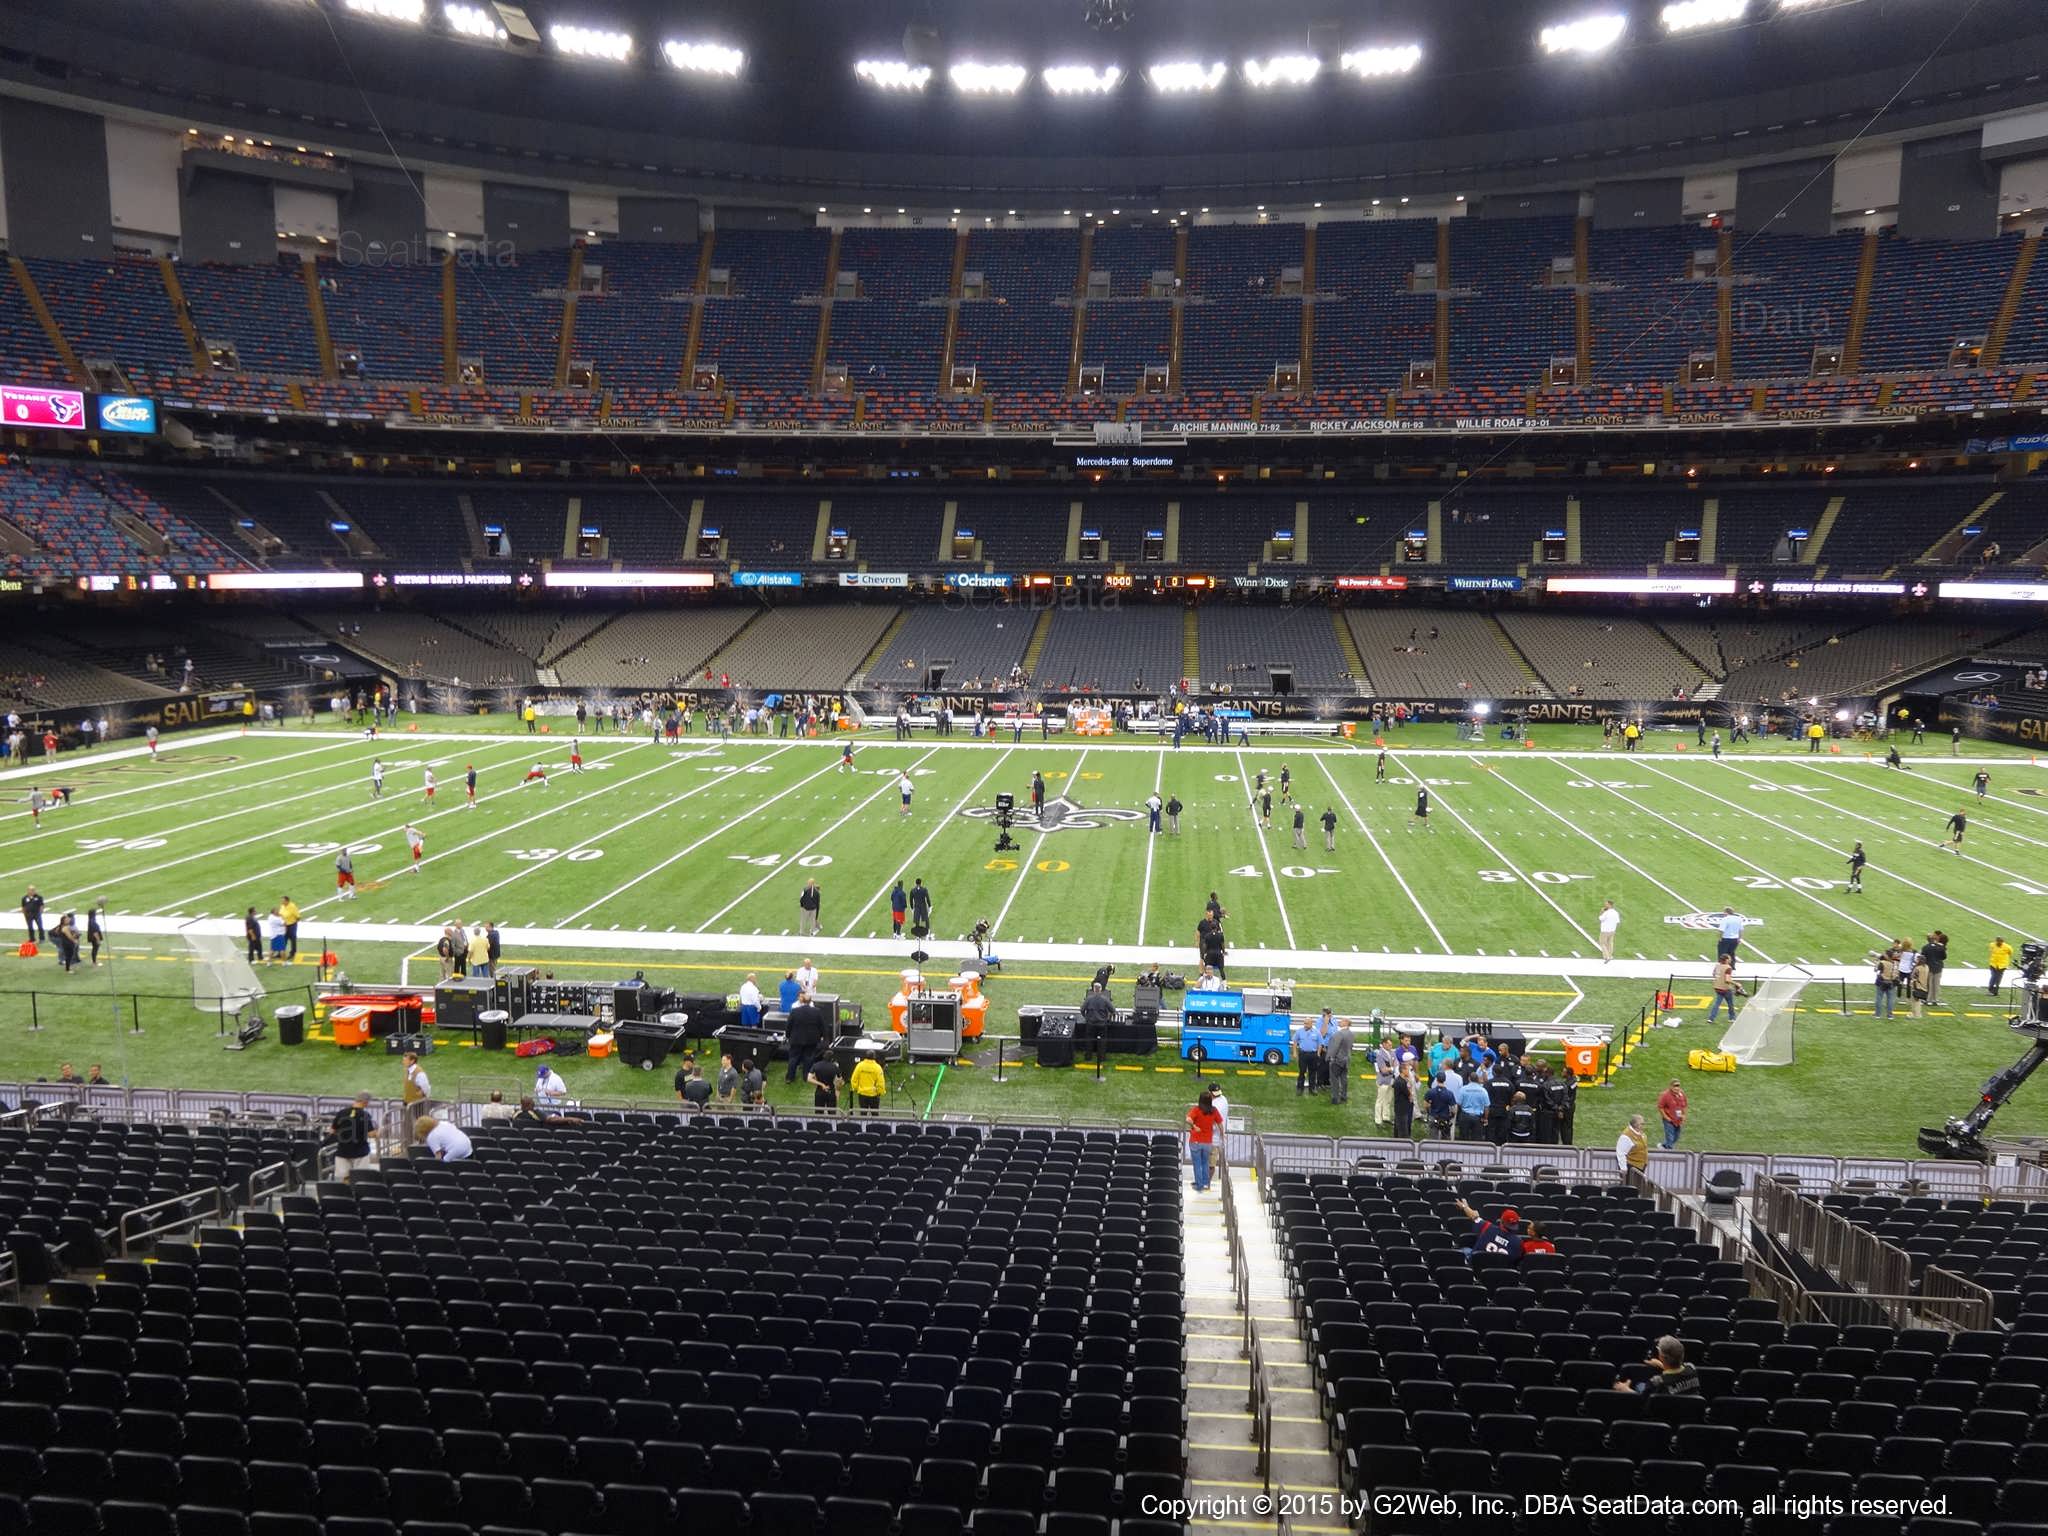 Seat view from section 263 at the Mercedes-Benz Superdome, home of the New Orleans Saints